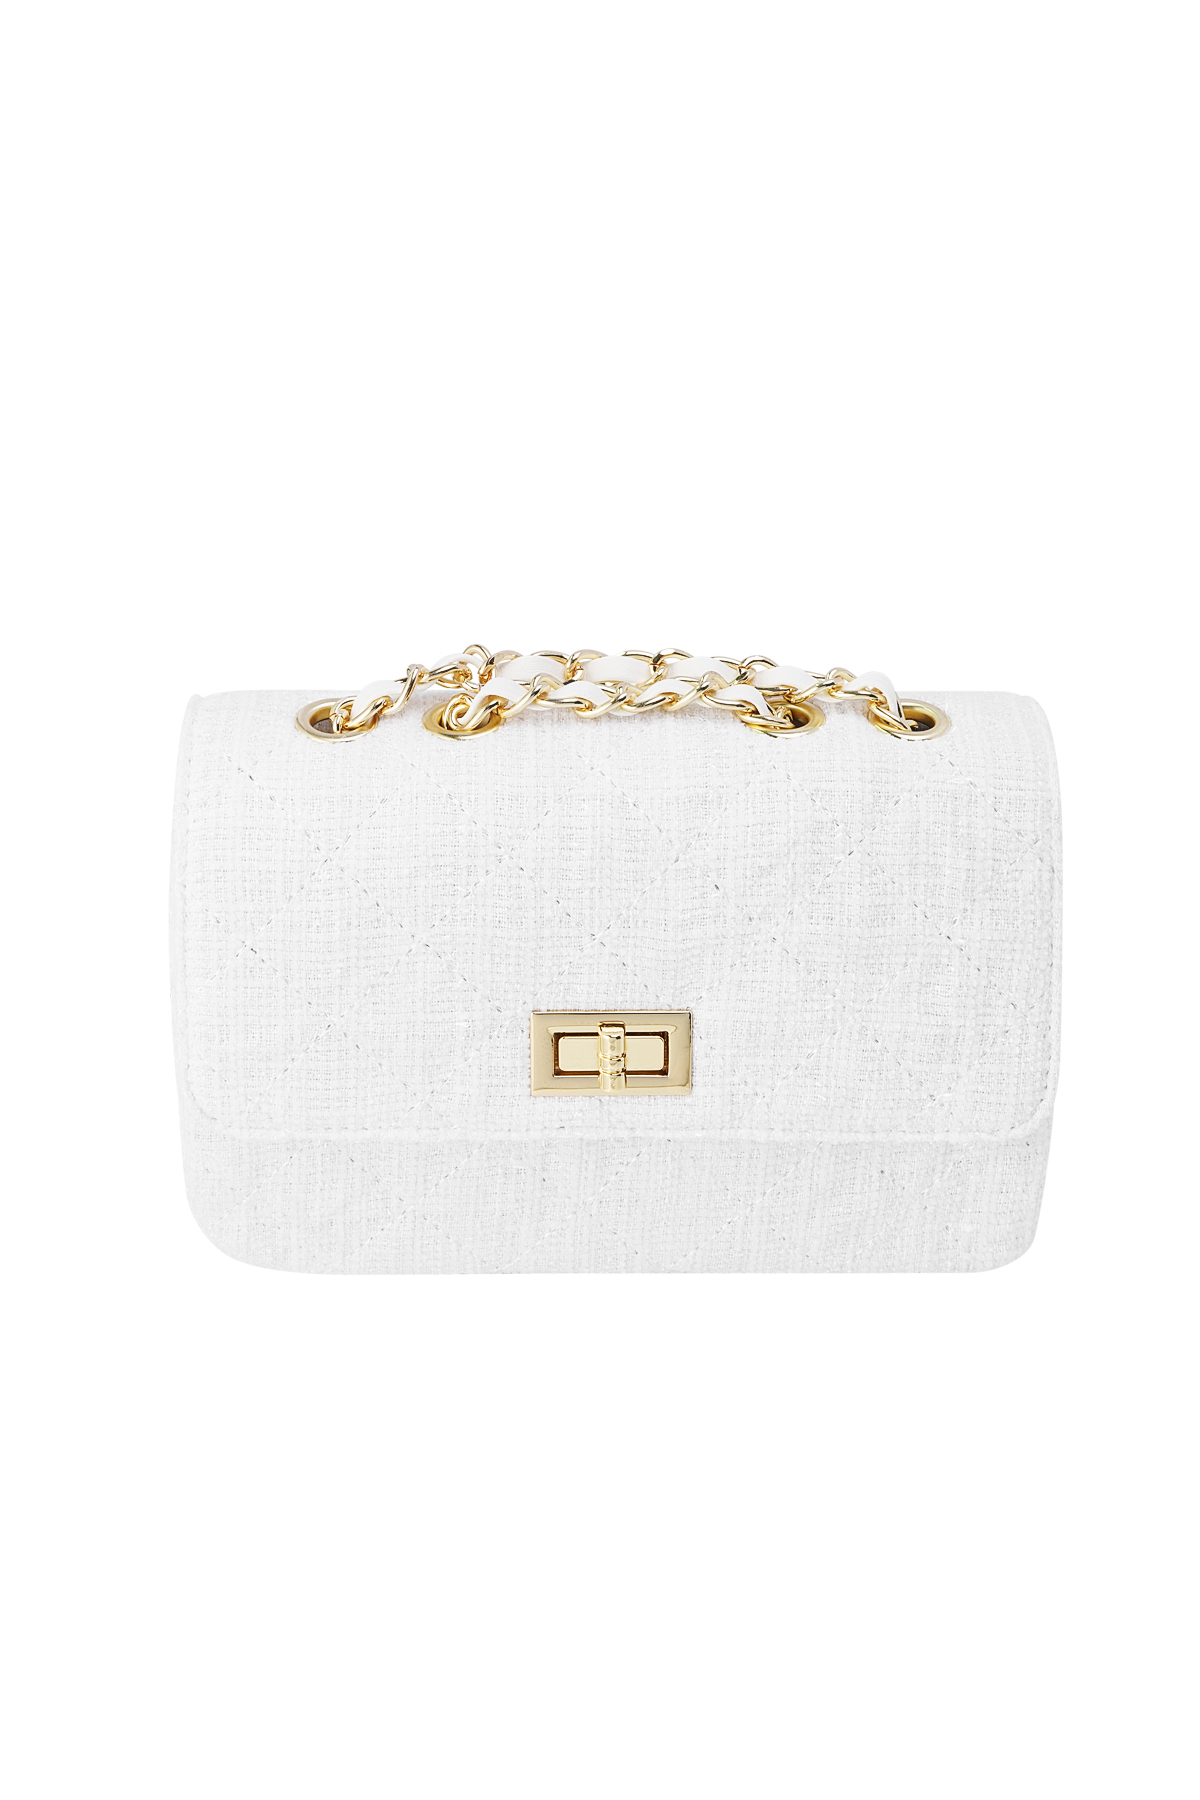 Bag with stitching and gold detail - white Polyester